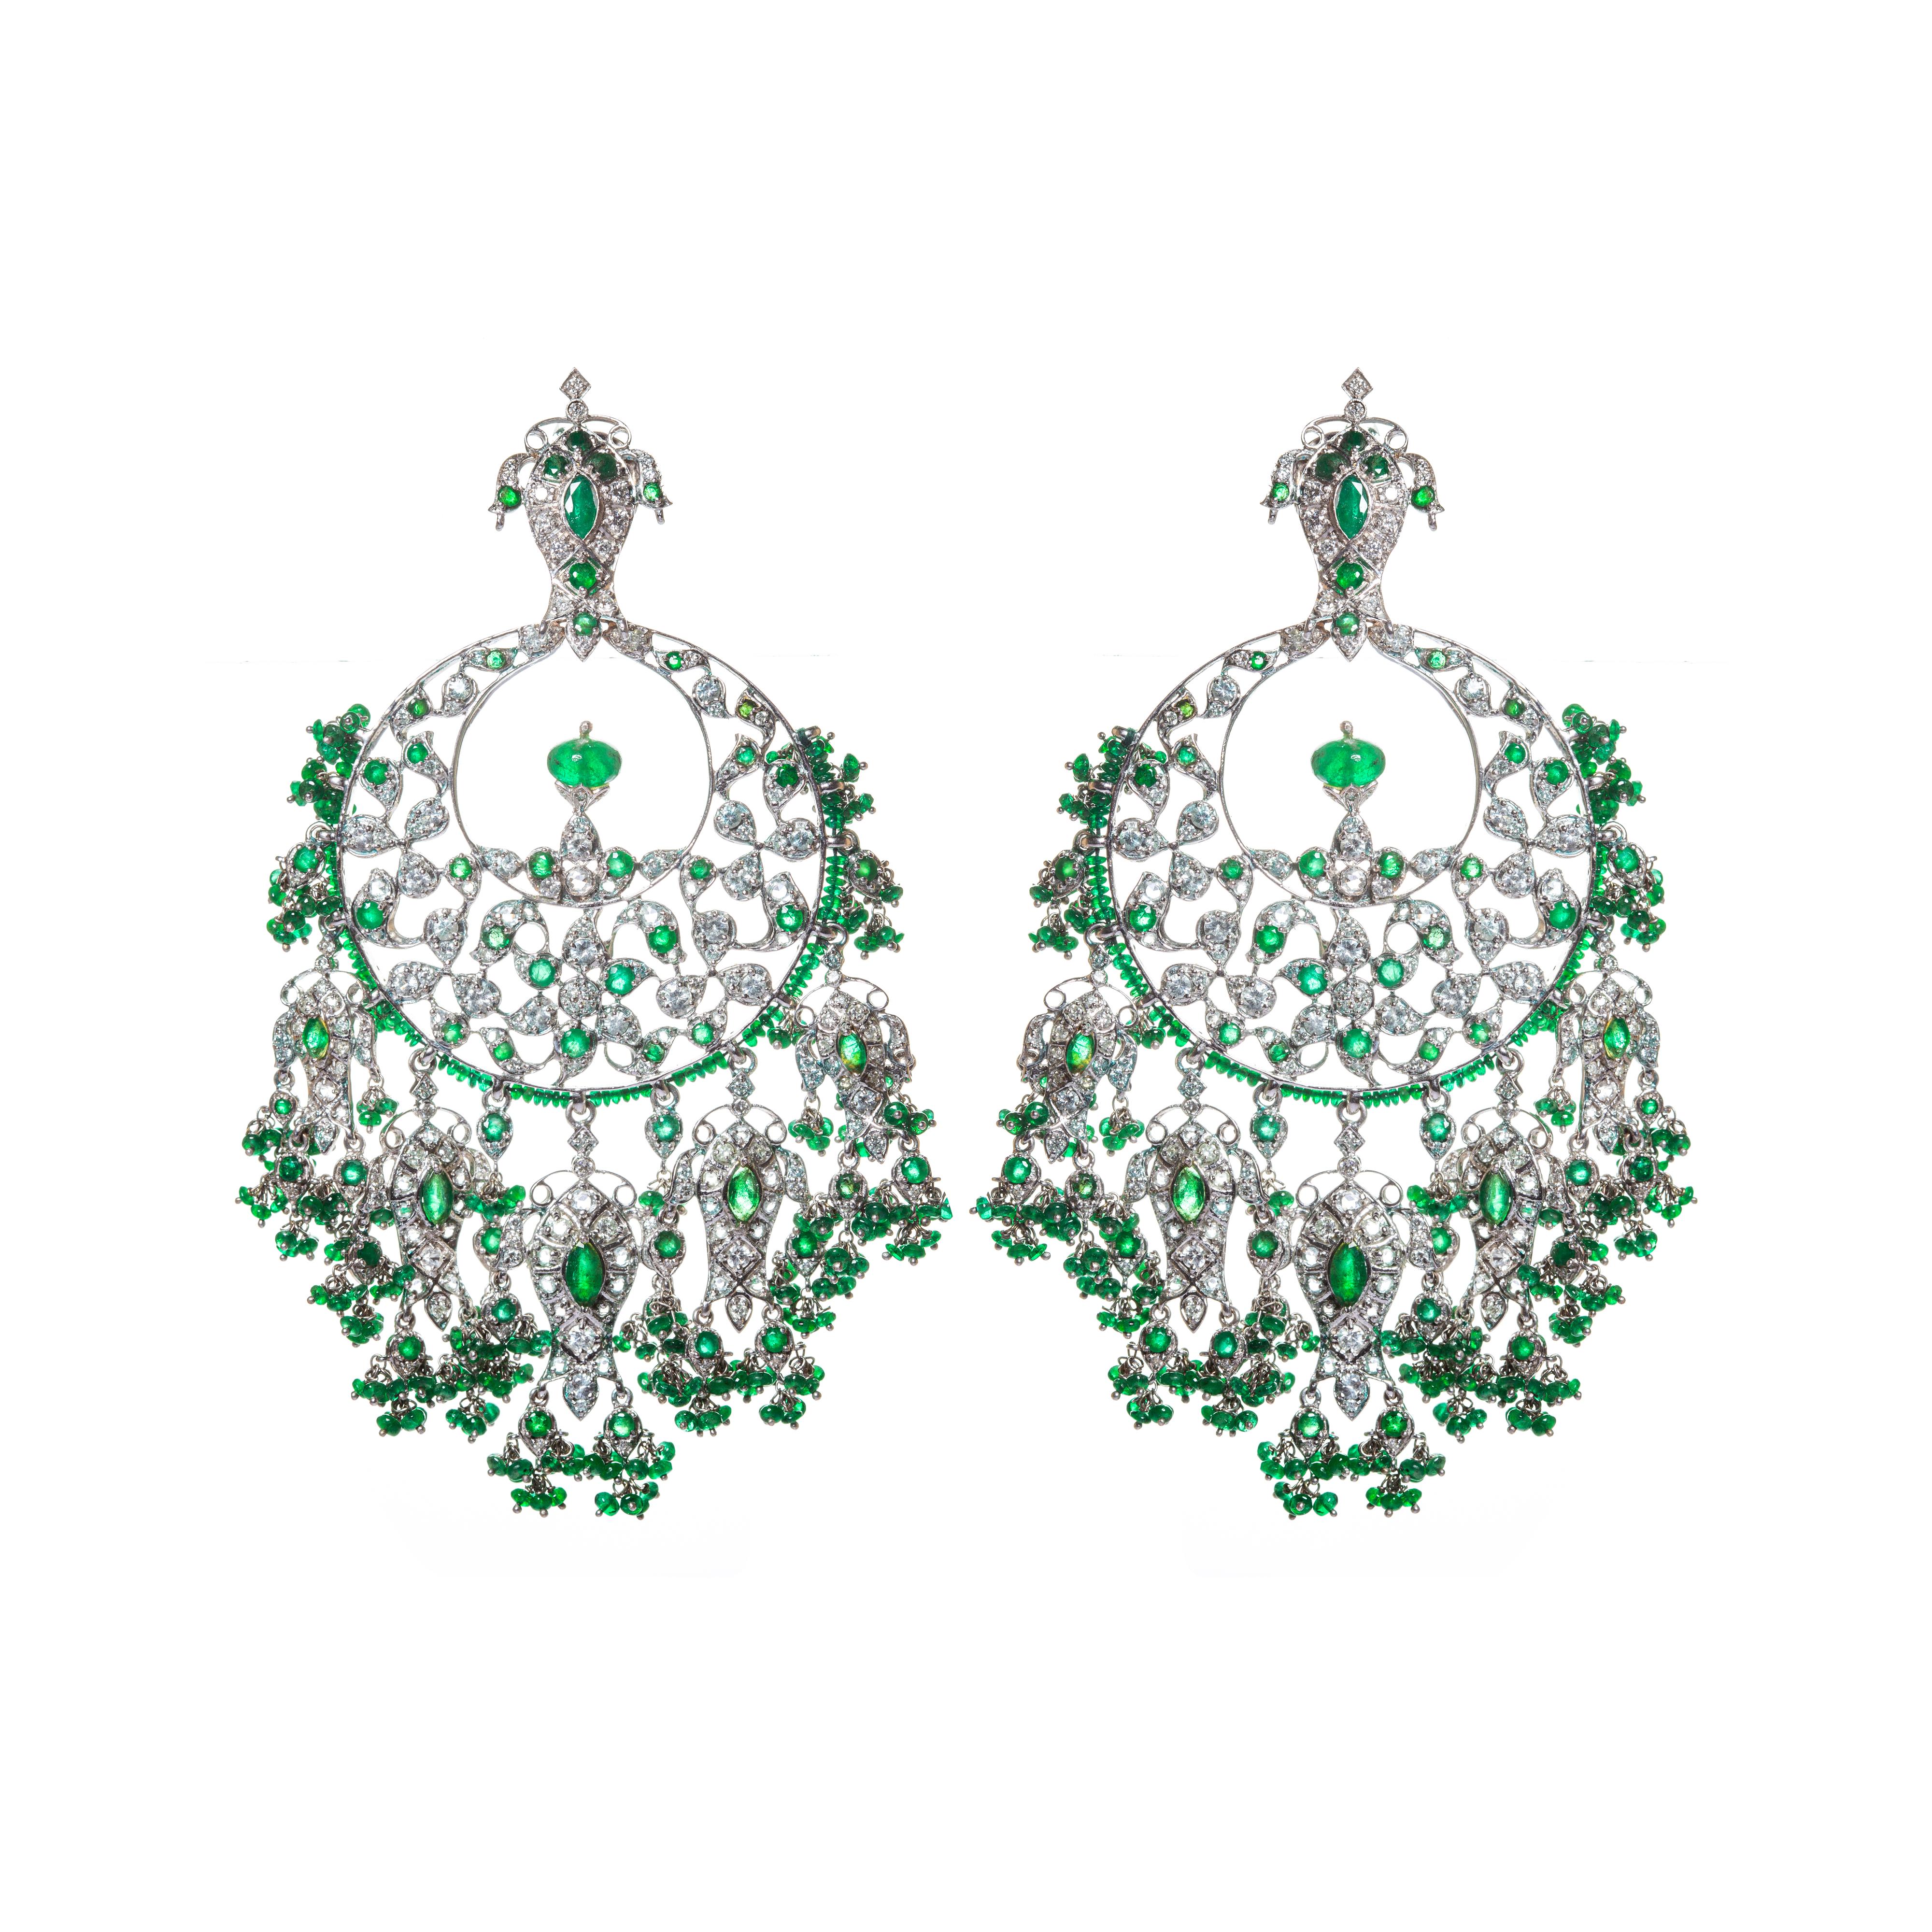 Brilliant Cut KimK Emerald Earrings with Diamonds and White Sapphires For Sale